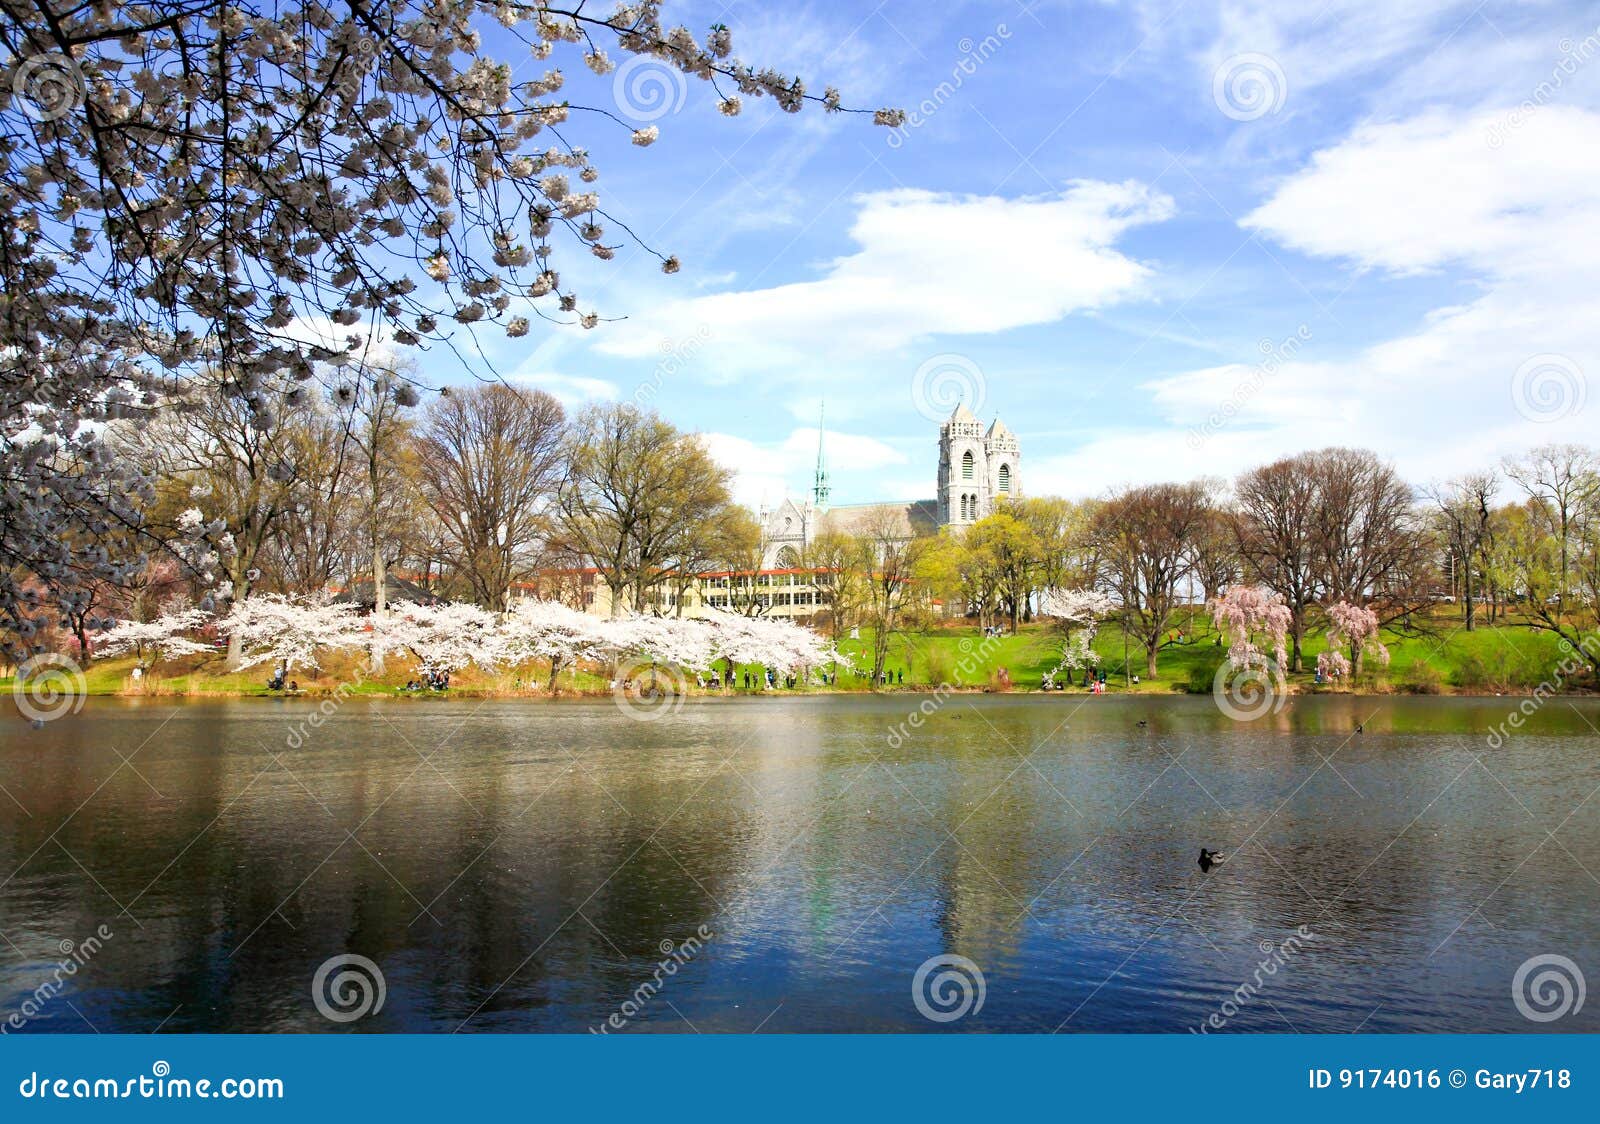 The Cherry Blossom Festival in New Jersey Stock Photo Image of growth